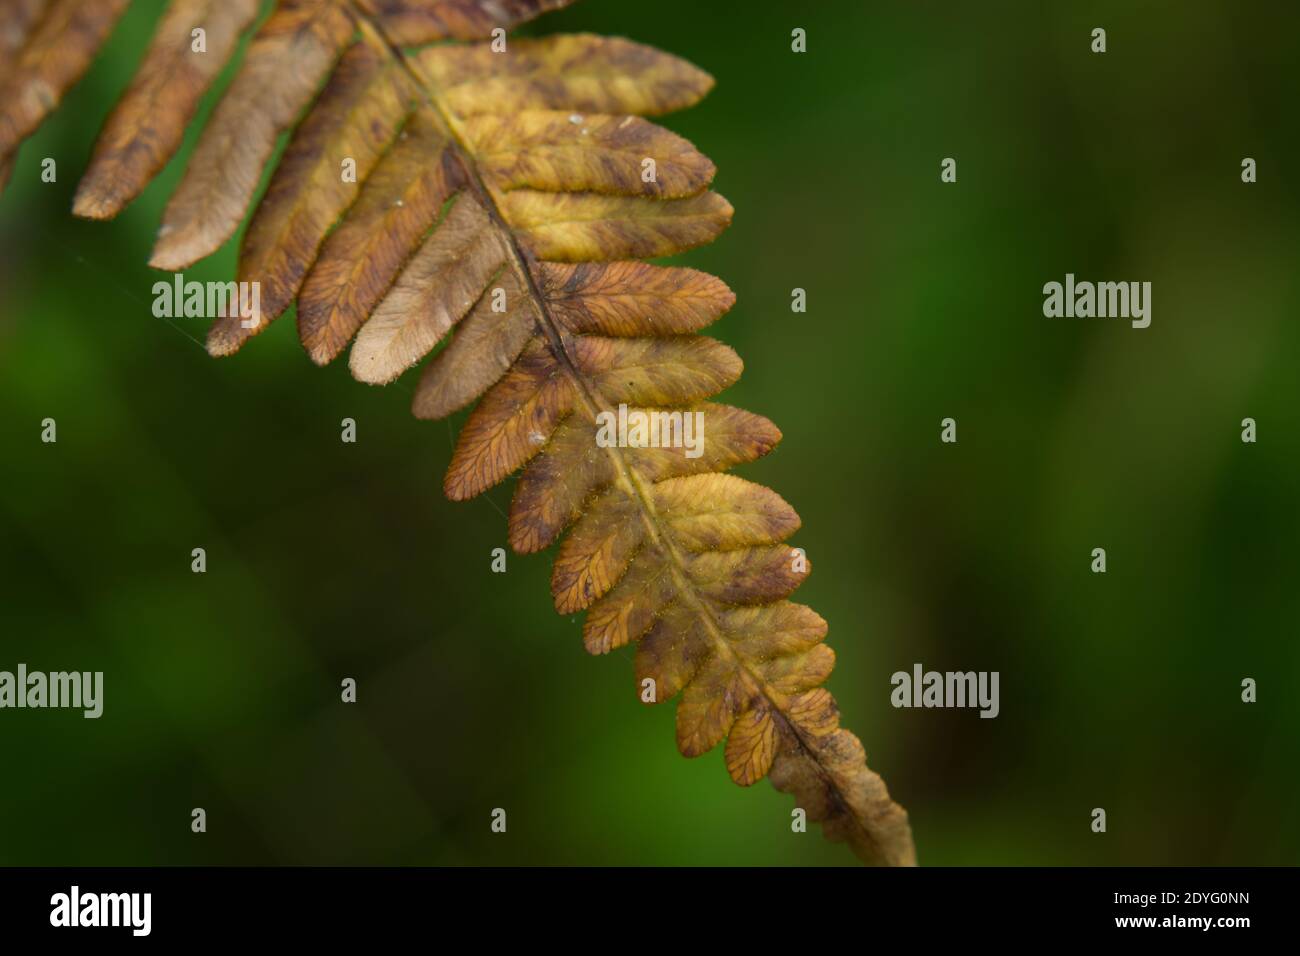 Brown yellow fern leaf on a green background Stock Photo